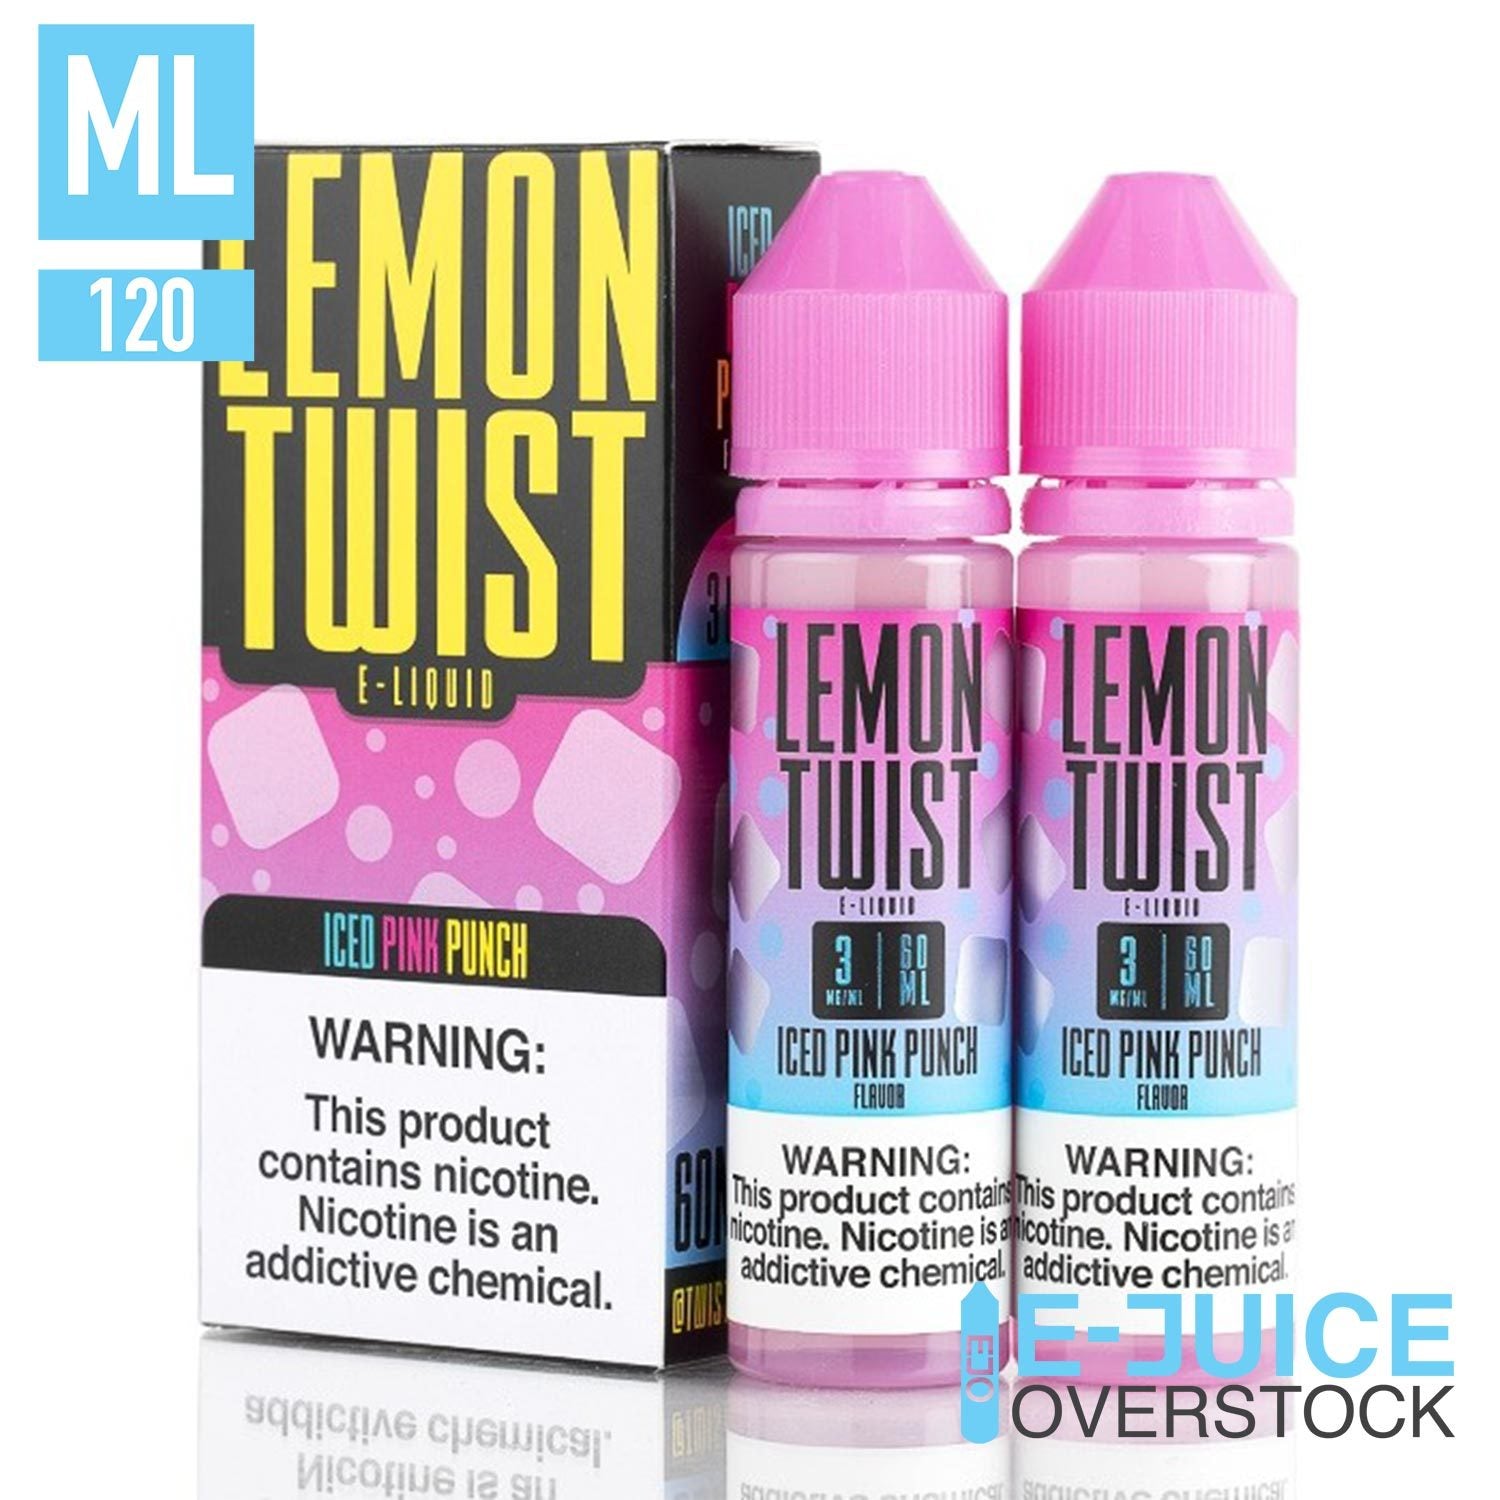 PINK NO. 0 (Iced Pink Punch by Lemon) by Twist E-liquids 2x60ML - EJUICEOVERSTOCK.COM